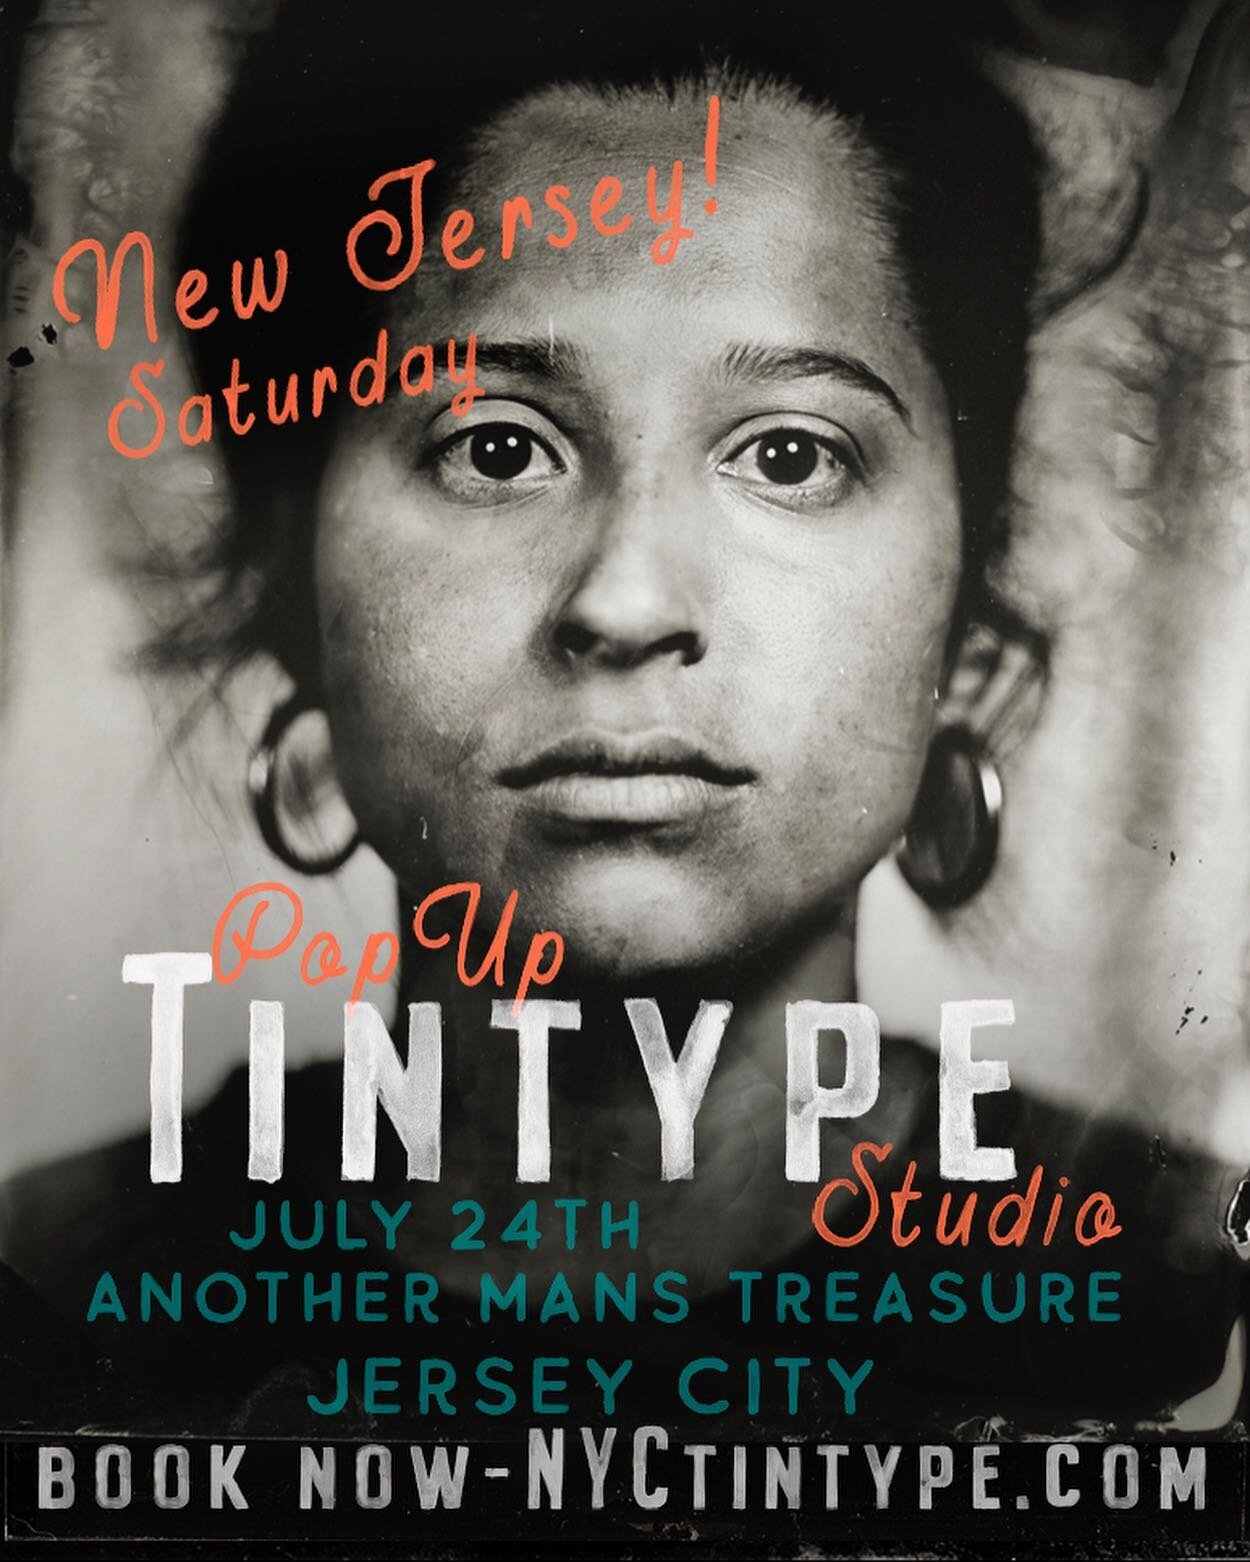 Saturday ill be at @amtvintage !
Only one early bird special is left. 3 tintypes for $200. 
Otherwise they are $100 each!

Book at NYCtinype.com or click the product link!

.⁣
.⁣
.⁣
.⁣
.⁣
#jerseycitypopup #hobokenlife #jerseycityfoodie #supportindepe